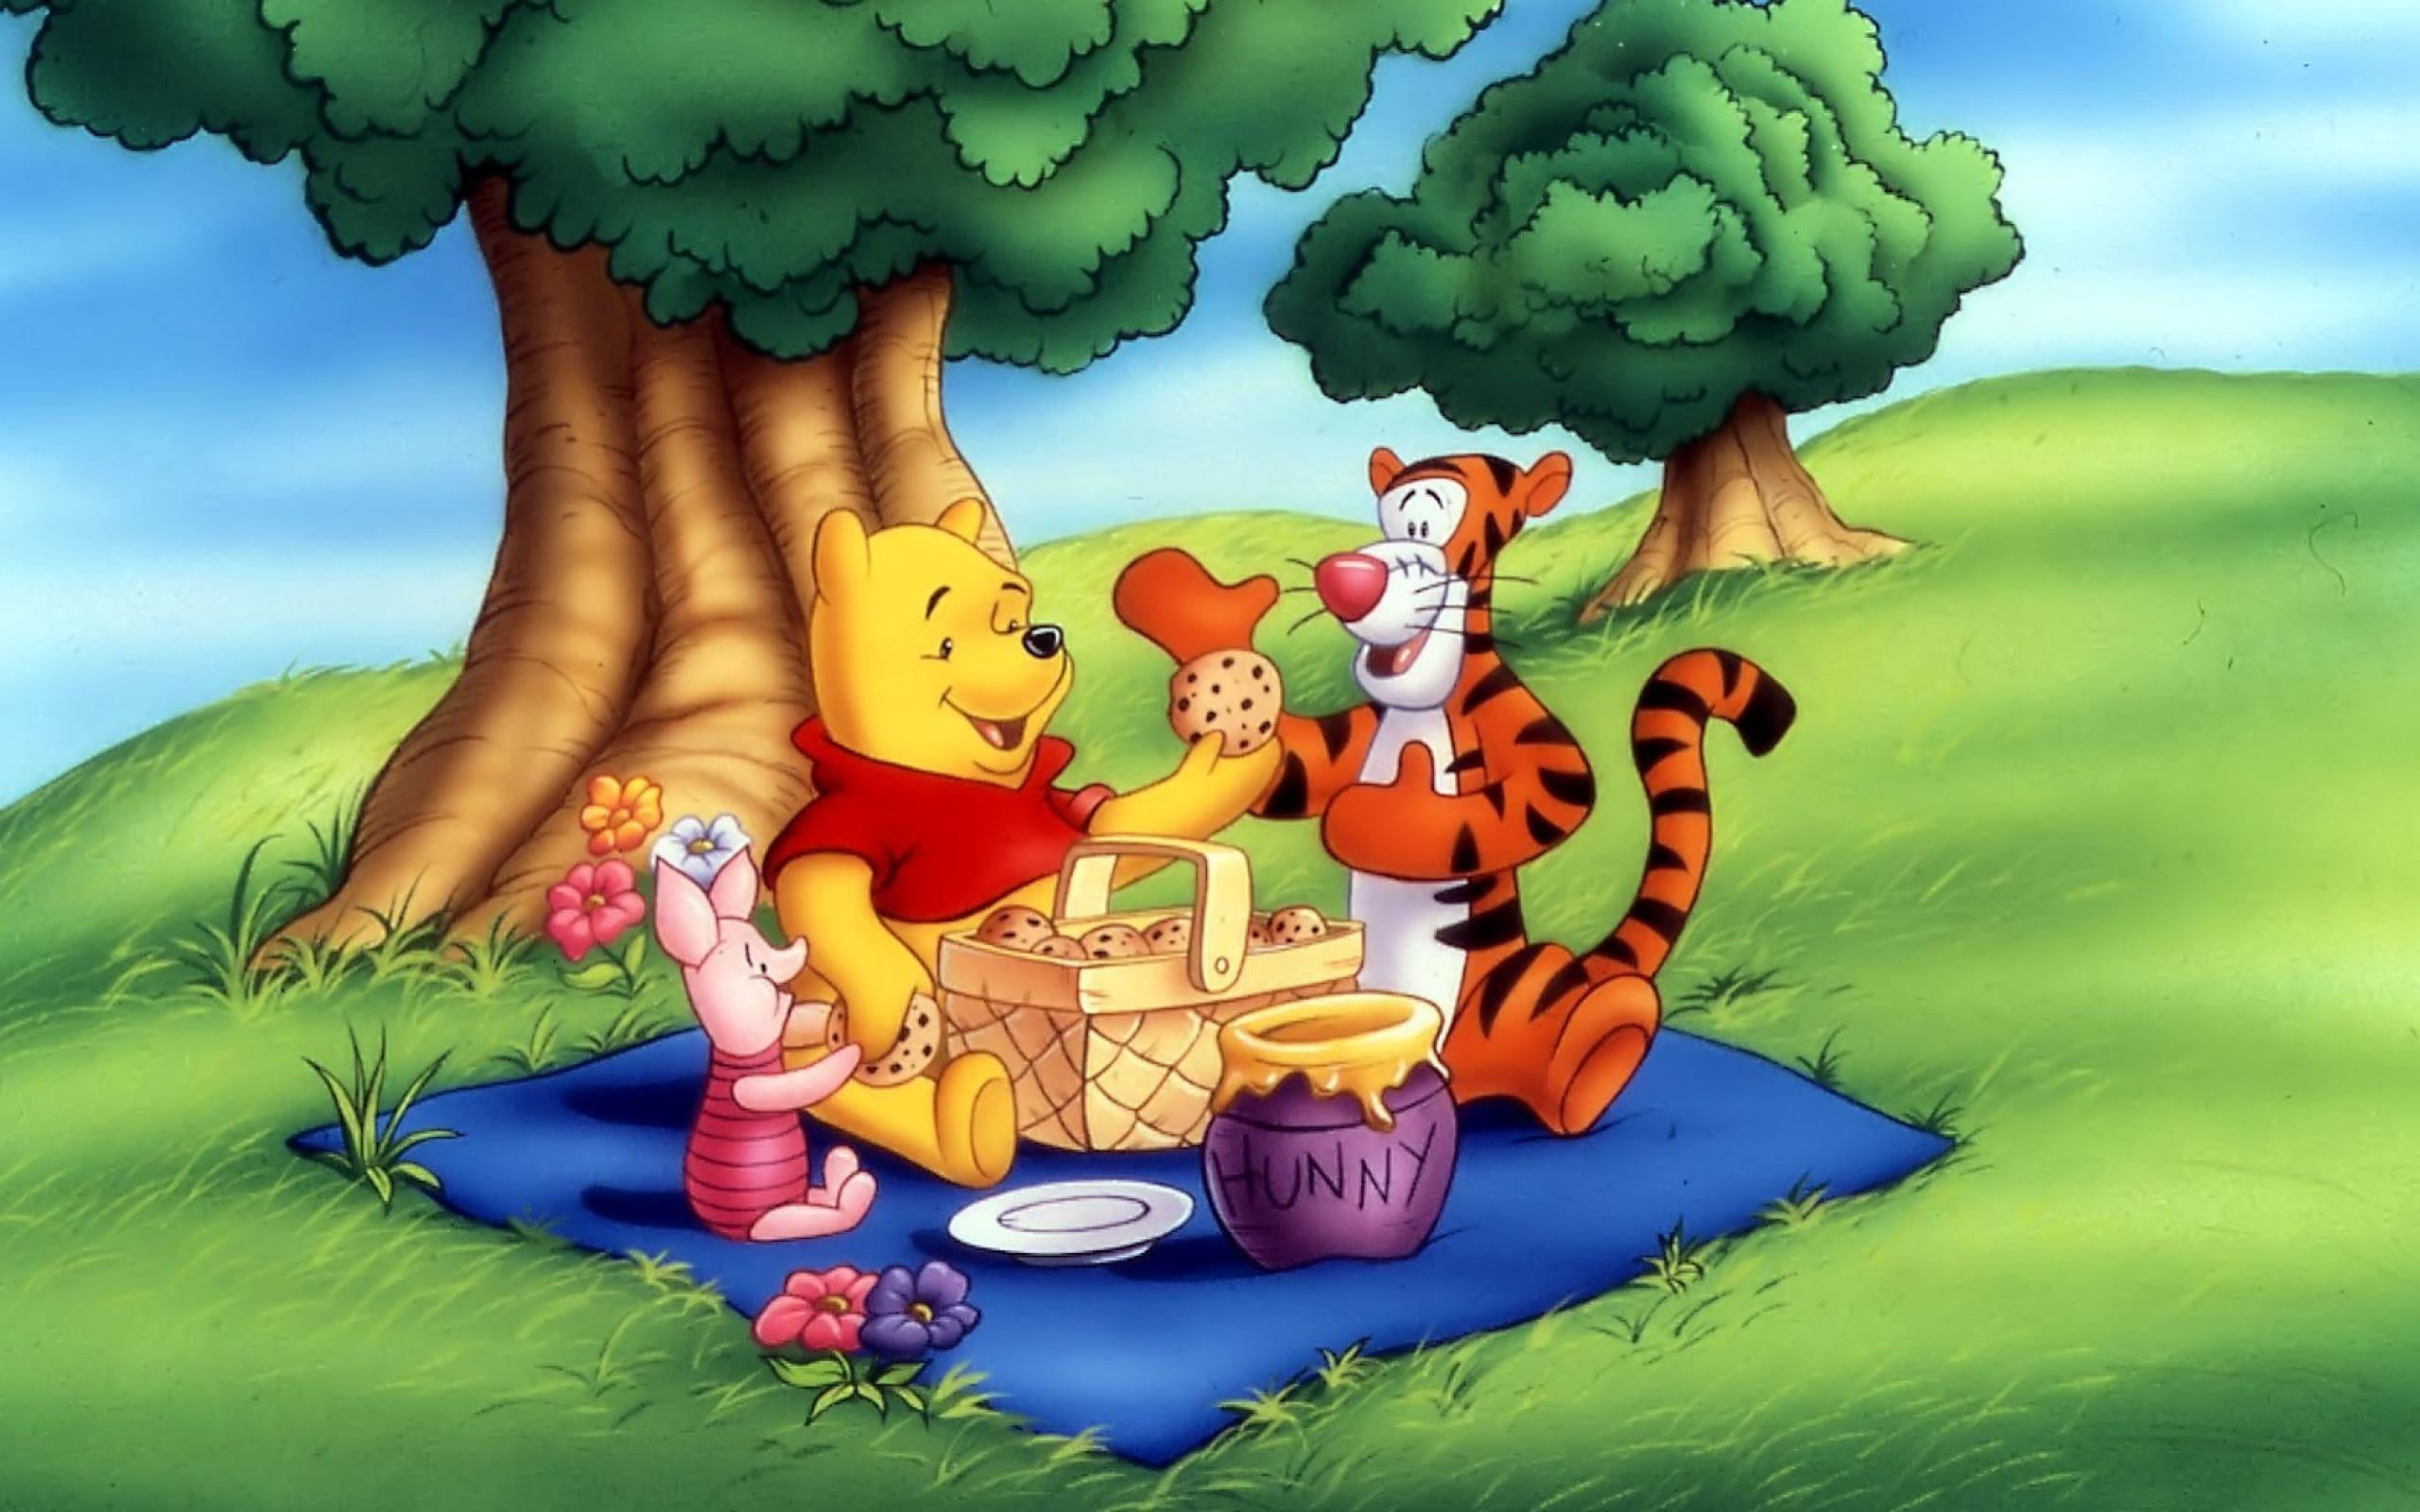 Tigger, Winnie-the-Pooh animation, Tigger wallpapers, None specified, 2560x1600 HD Desktop